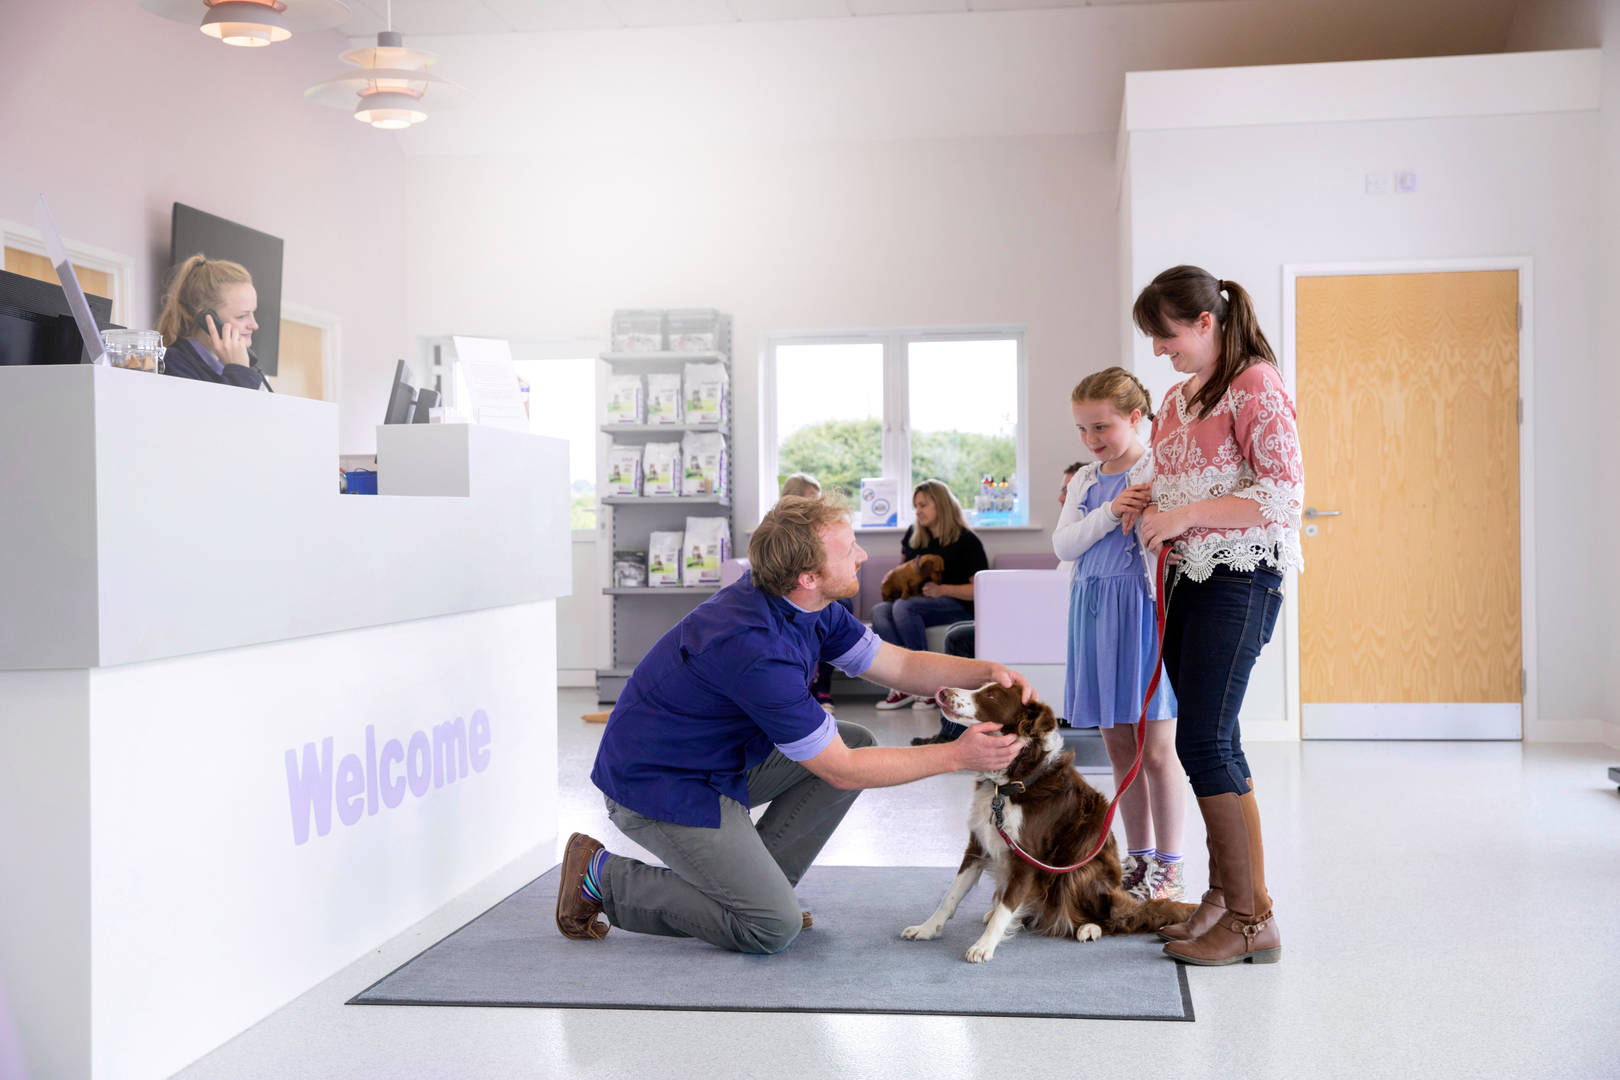 Pet owners greeted at front desk of veterinary practice